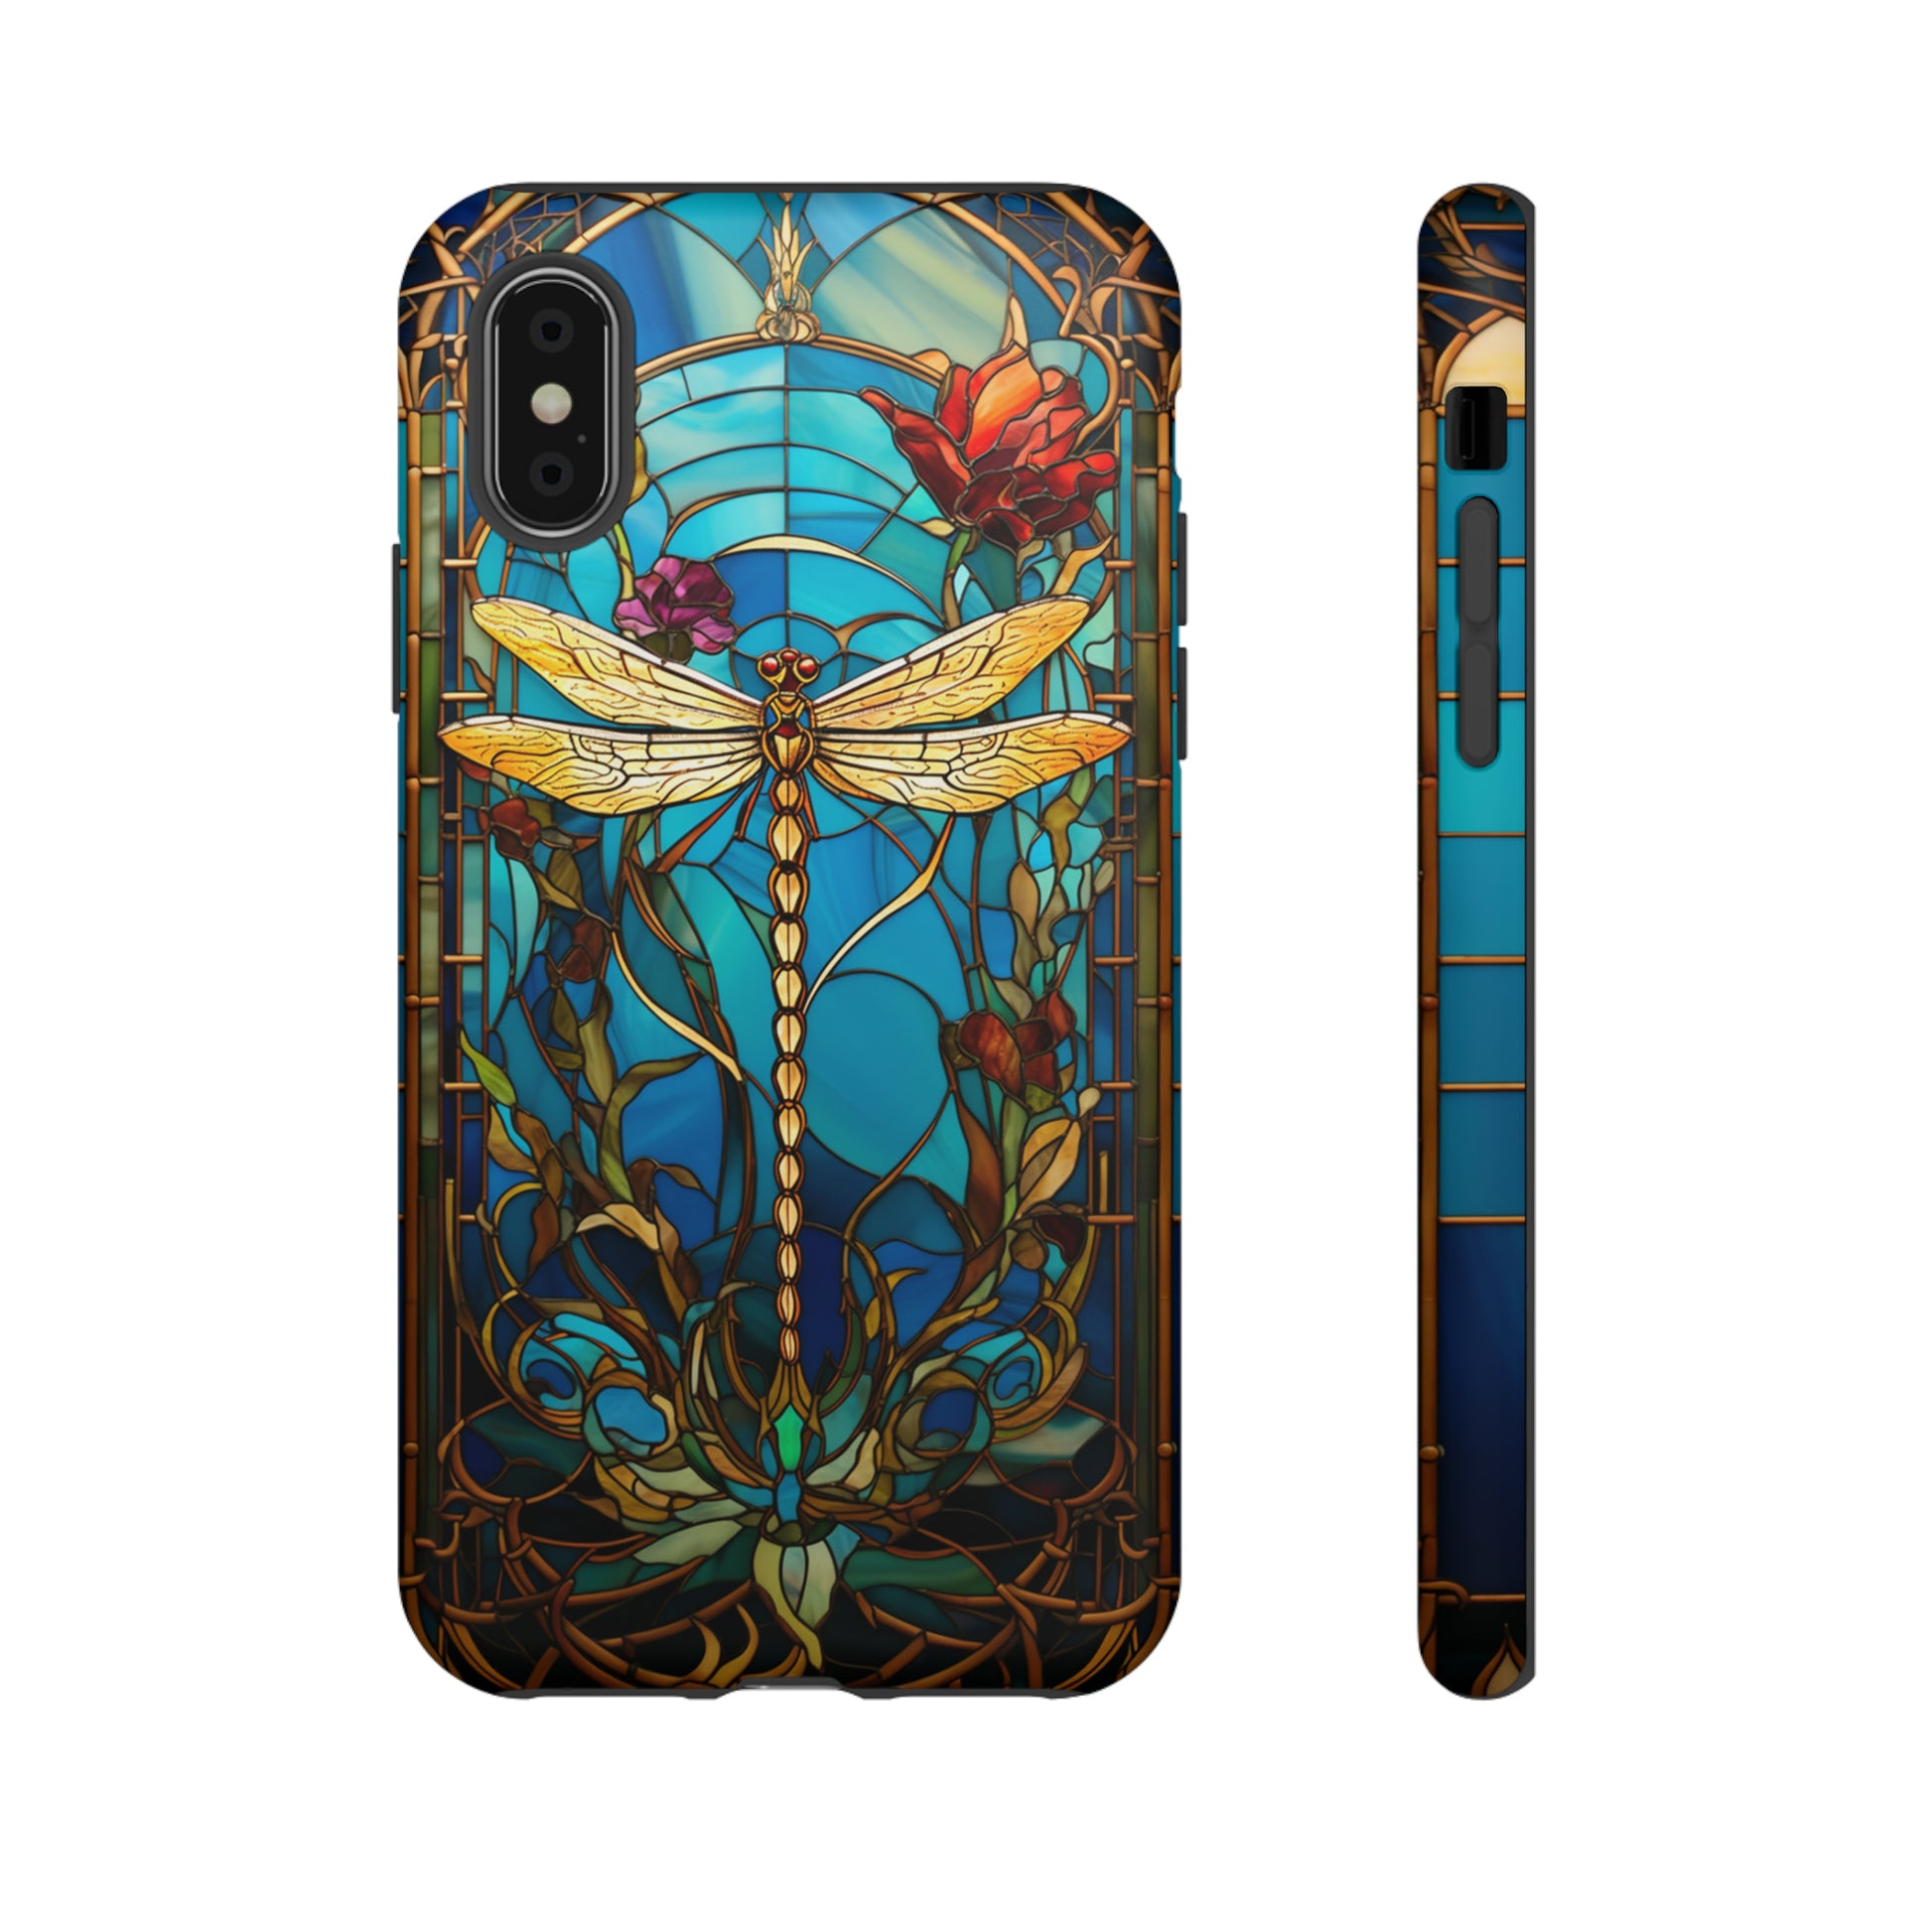 Vintage Dragonfly Phone Cover for Google Pixel